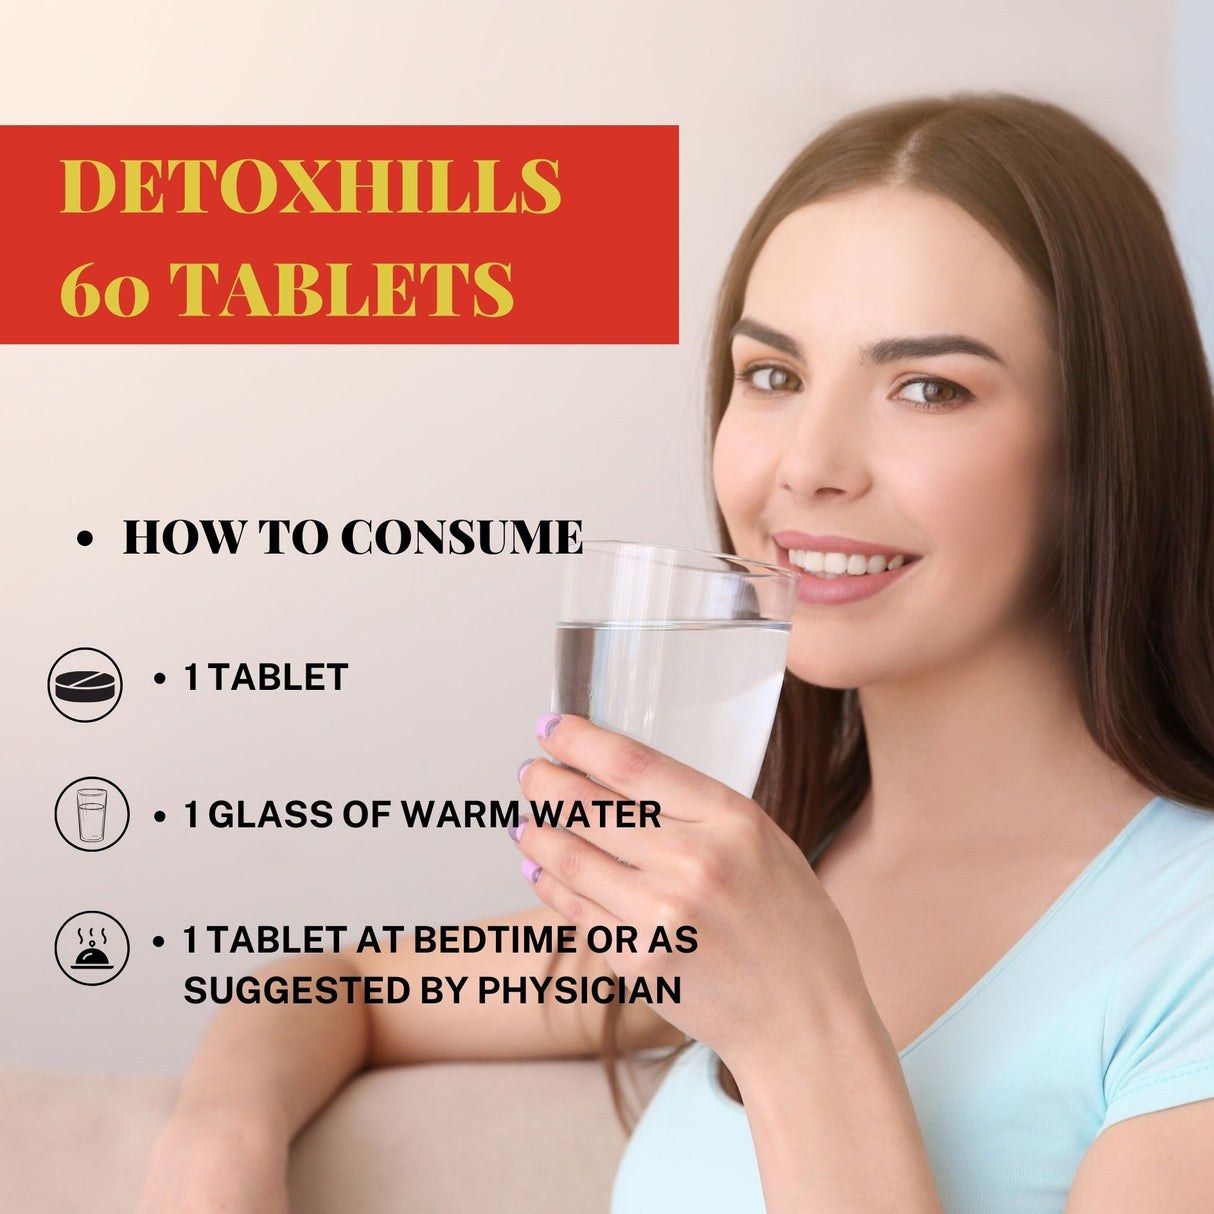 Detoxhills Tablets - how to consume